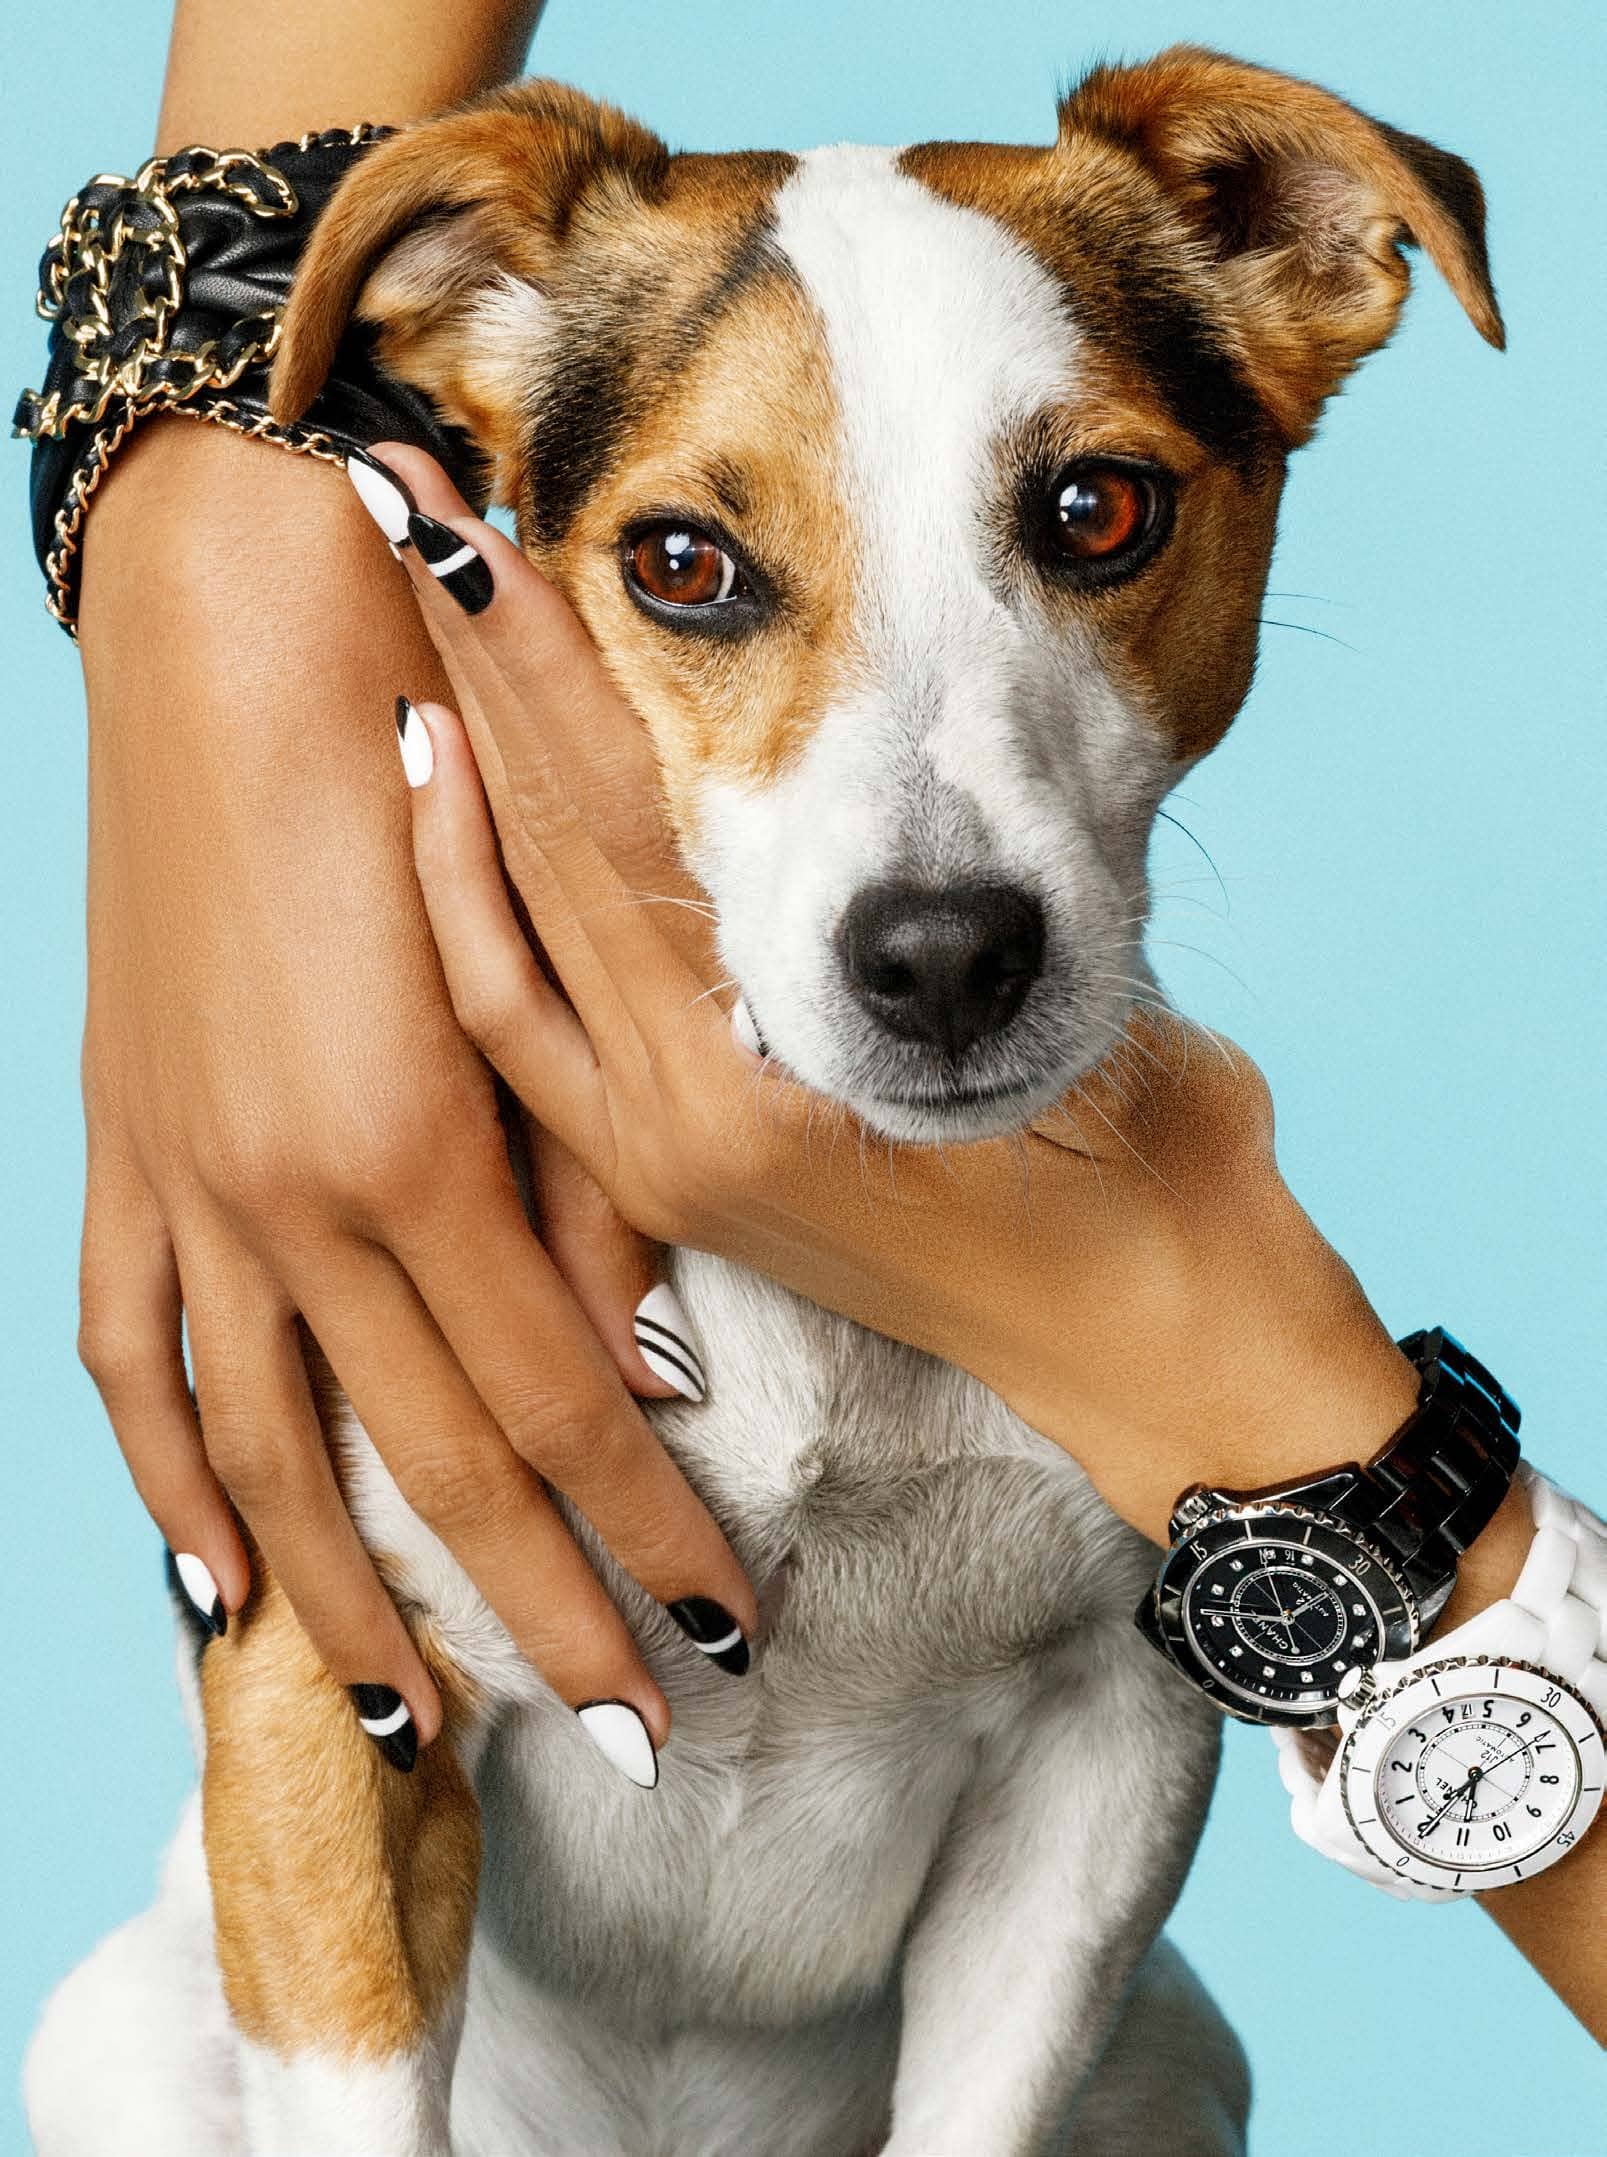 Cute Dogs, Cute Nails, and Cute Jewellery – Because You Deserve It